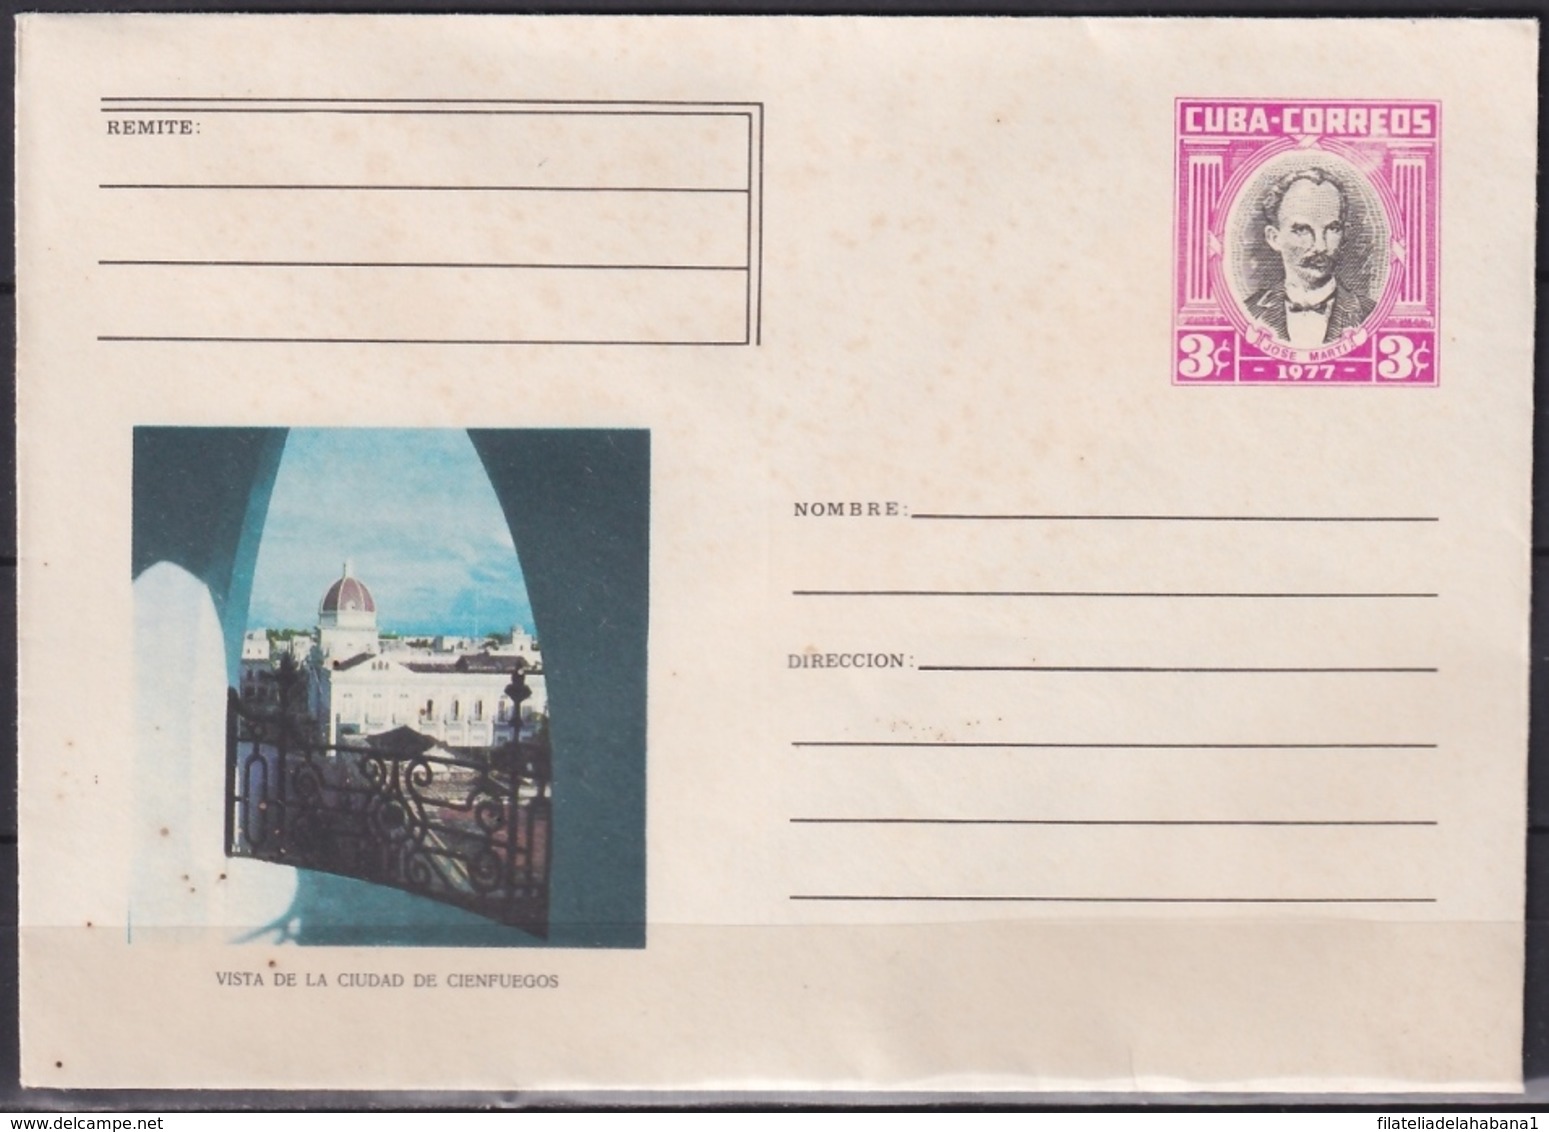 1977-EP-68 CUBA 1977 COMPLETE SET 5 POSTAL STATIONERY COVER COMPLETE YEAR. - Covers & Documents